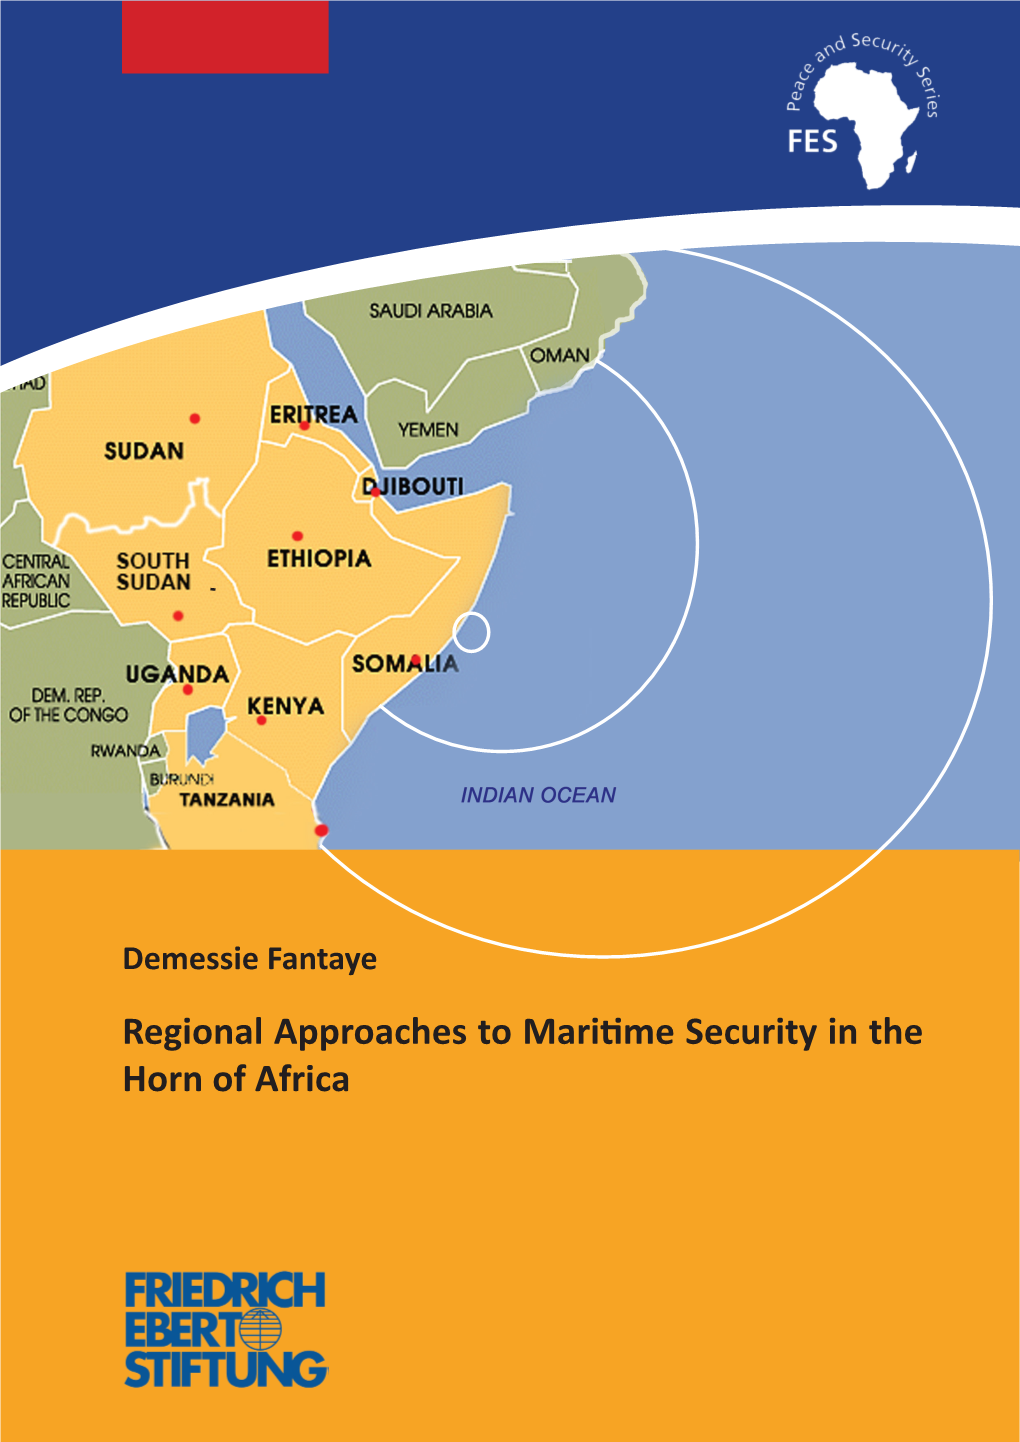 Regional Approaches to Maritime Security in the Horn of Africa